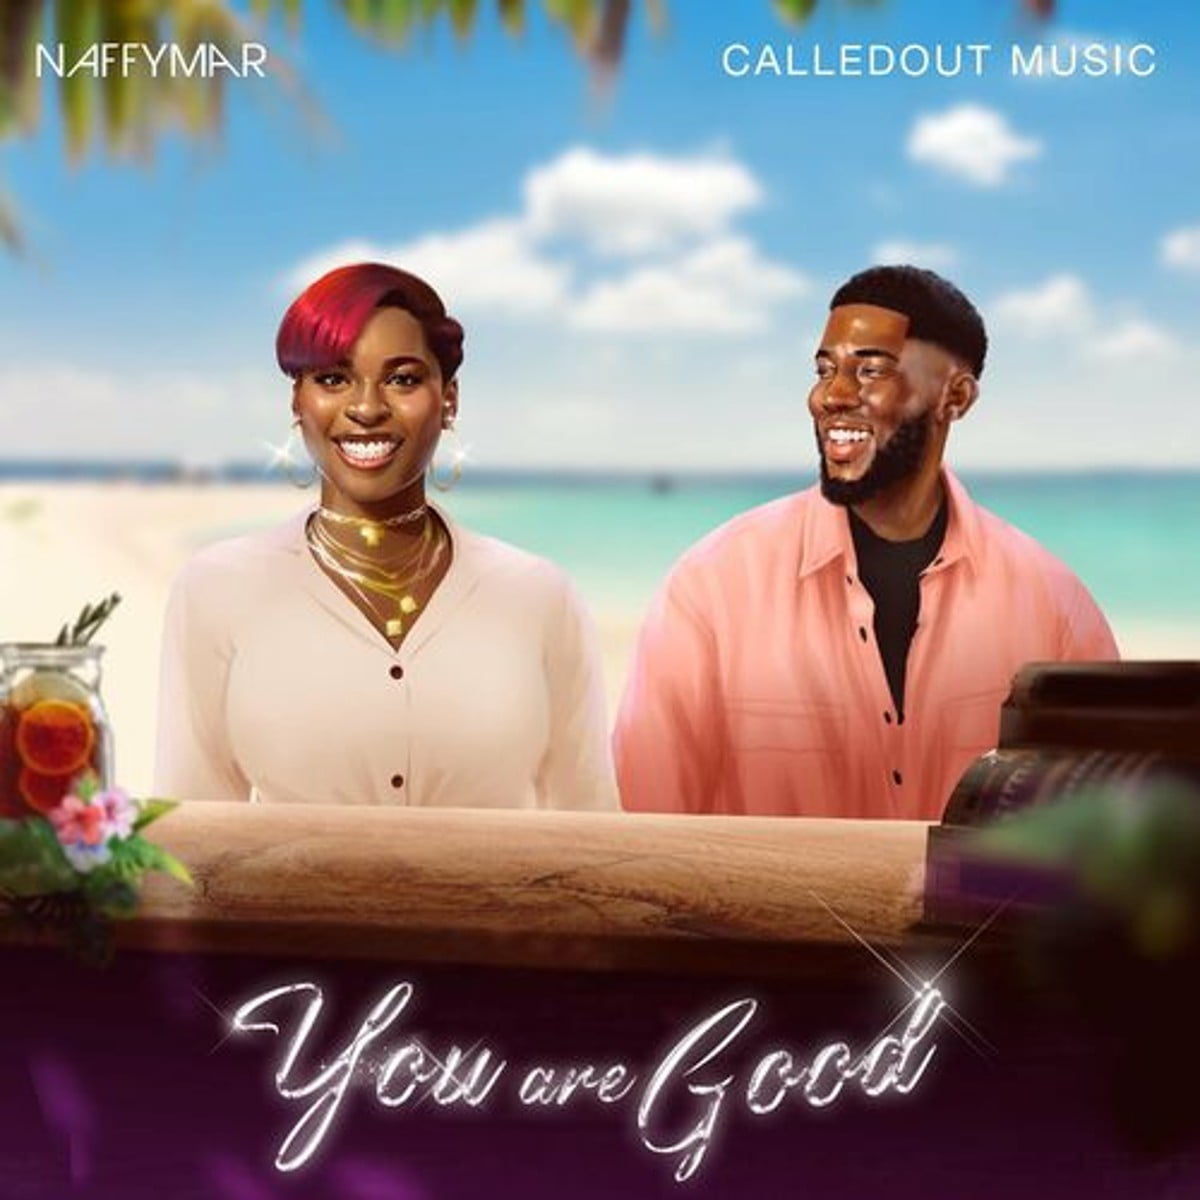 Naffymar - You Are Good ft. CalledOut Music mp3 lyrics itunes full song download